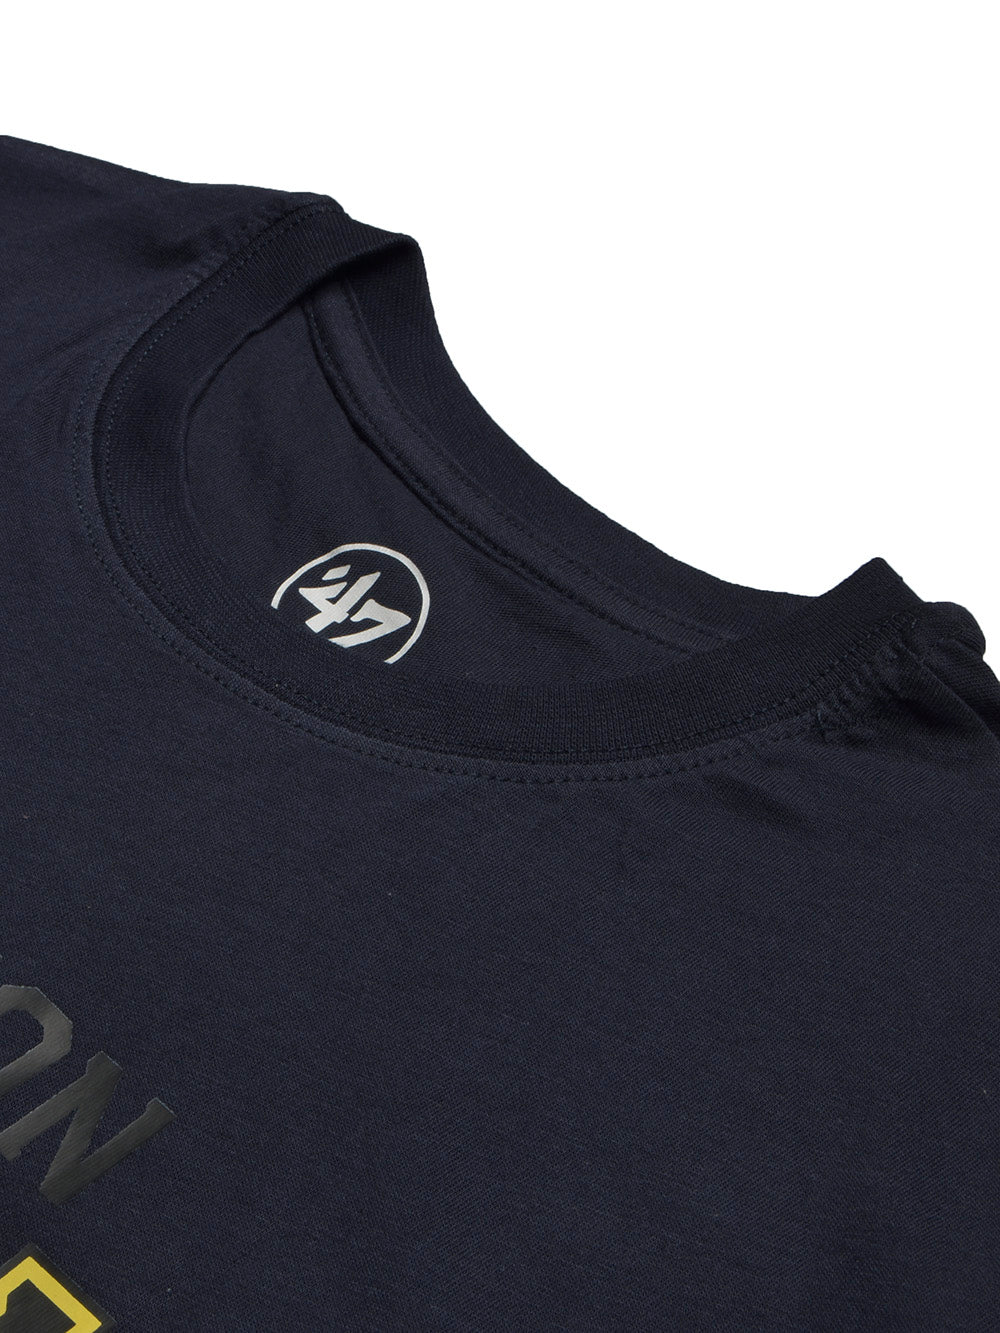 47 Single Jersey Crew Neck Tee Shirt For Men-Navy with Print-BE914/BR13175